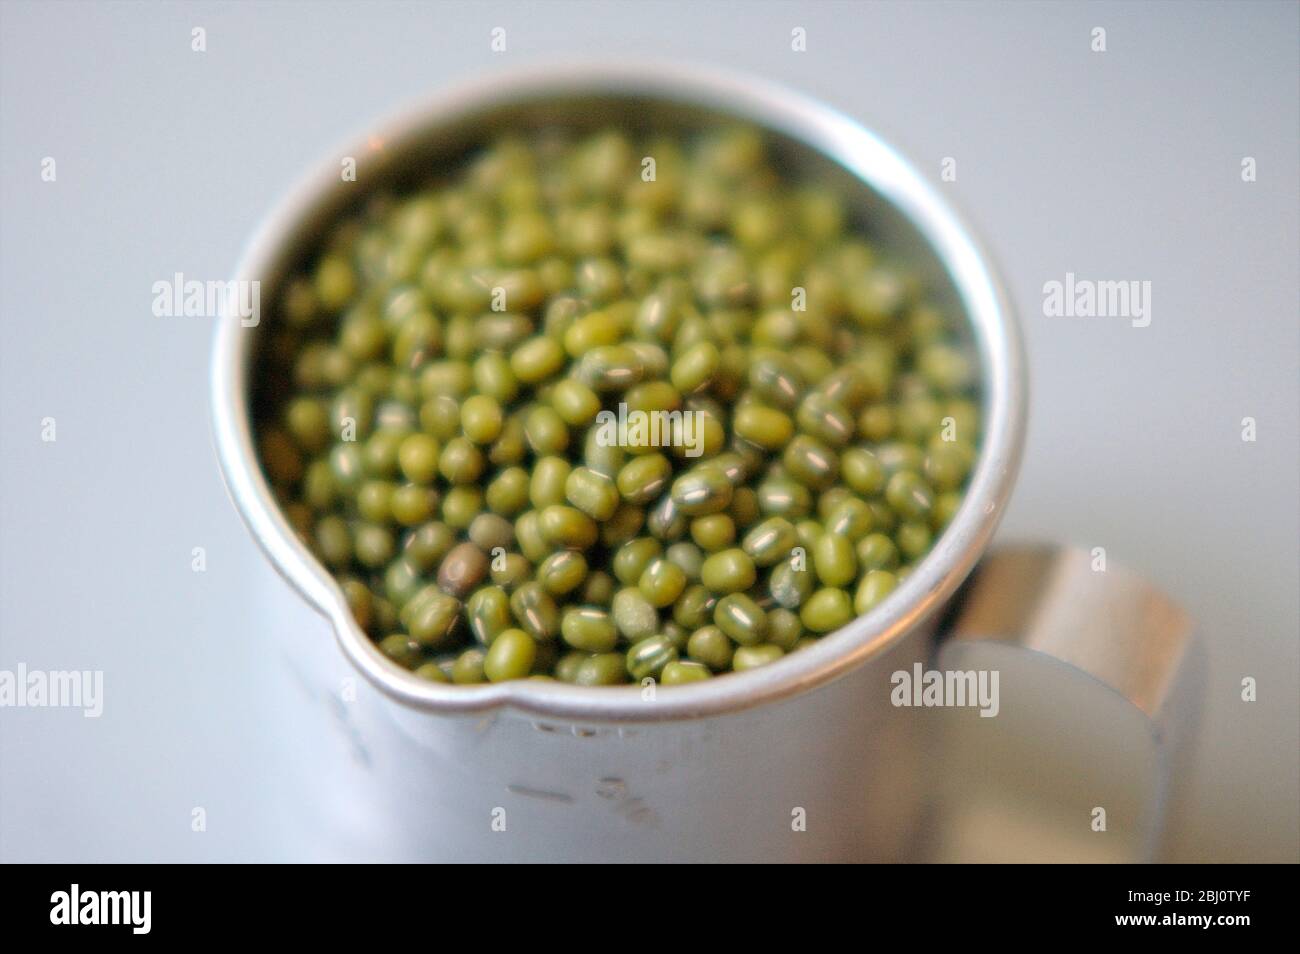 Mung beans in American cup measure - Stock Photo